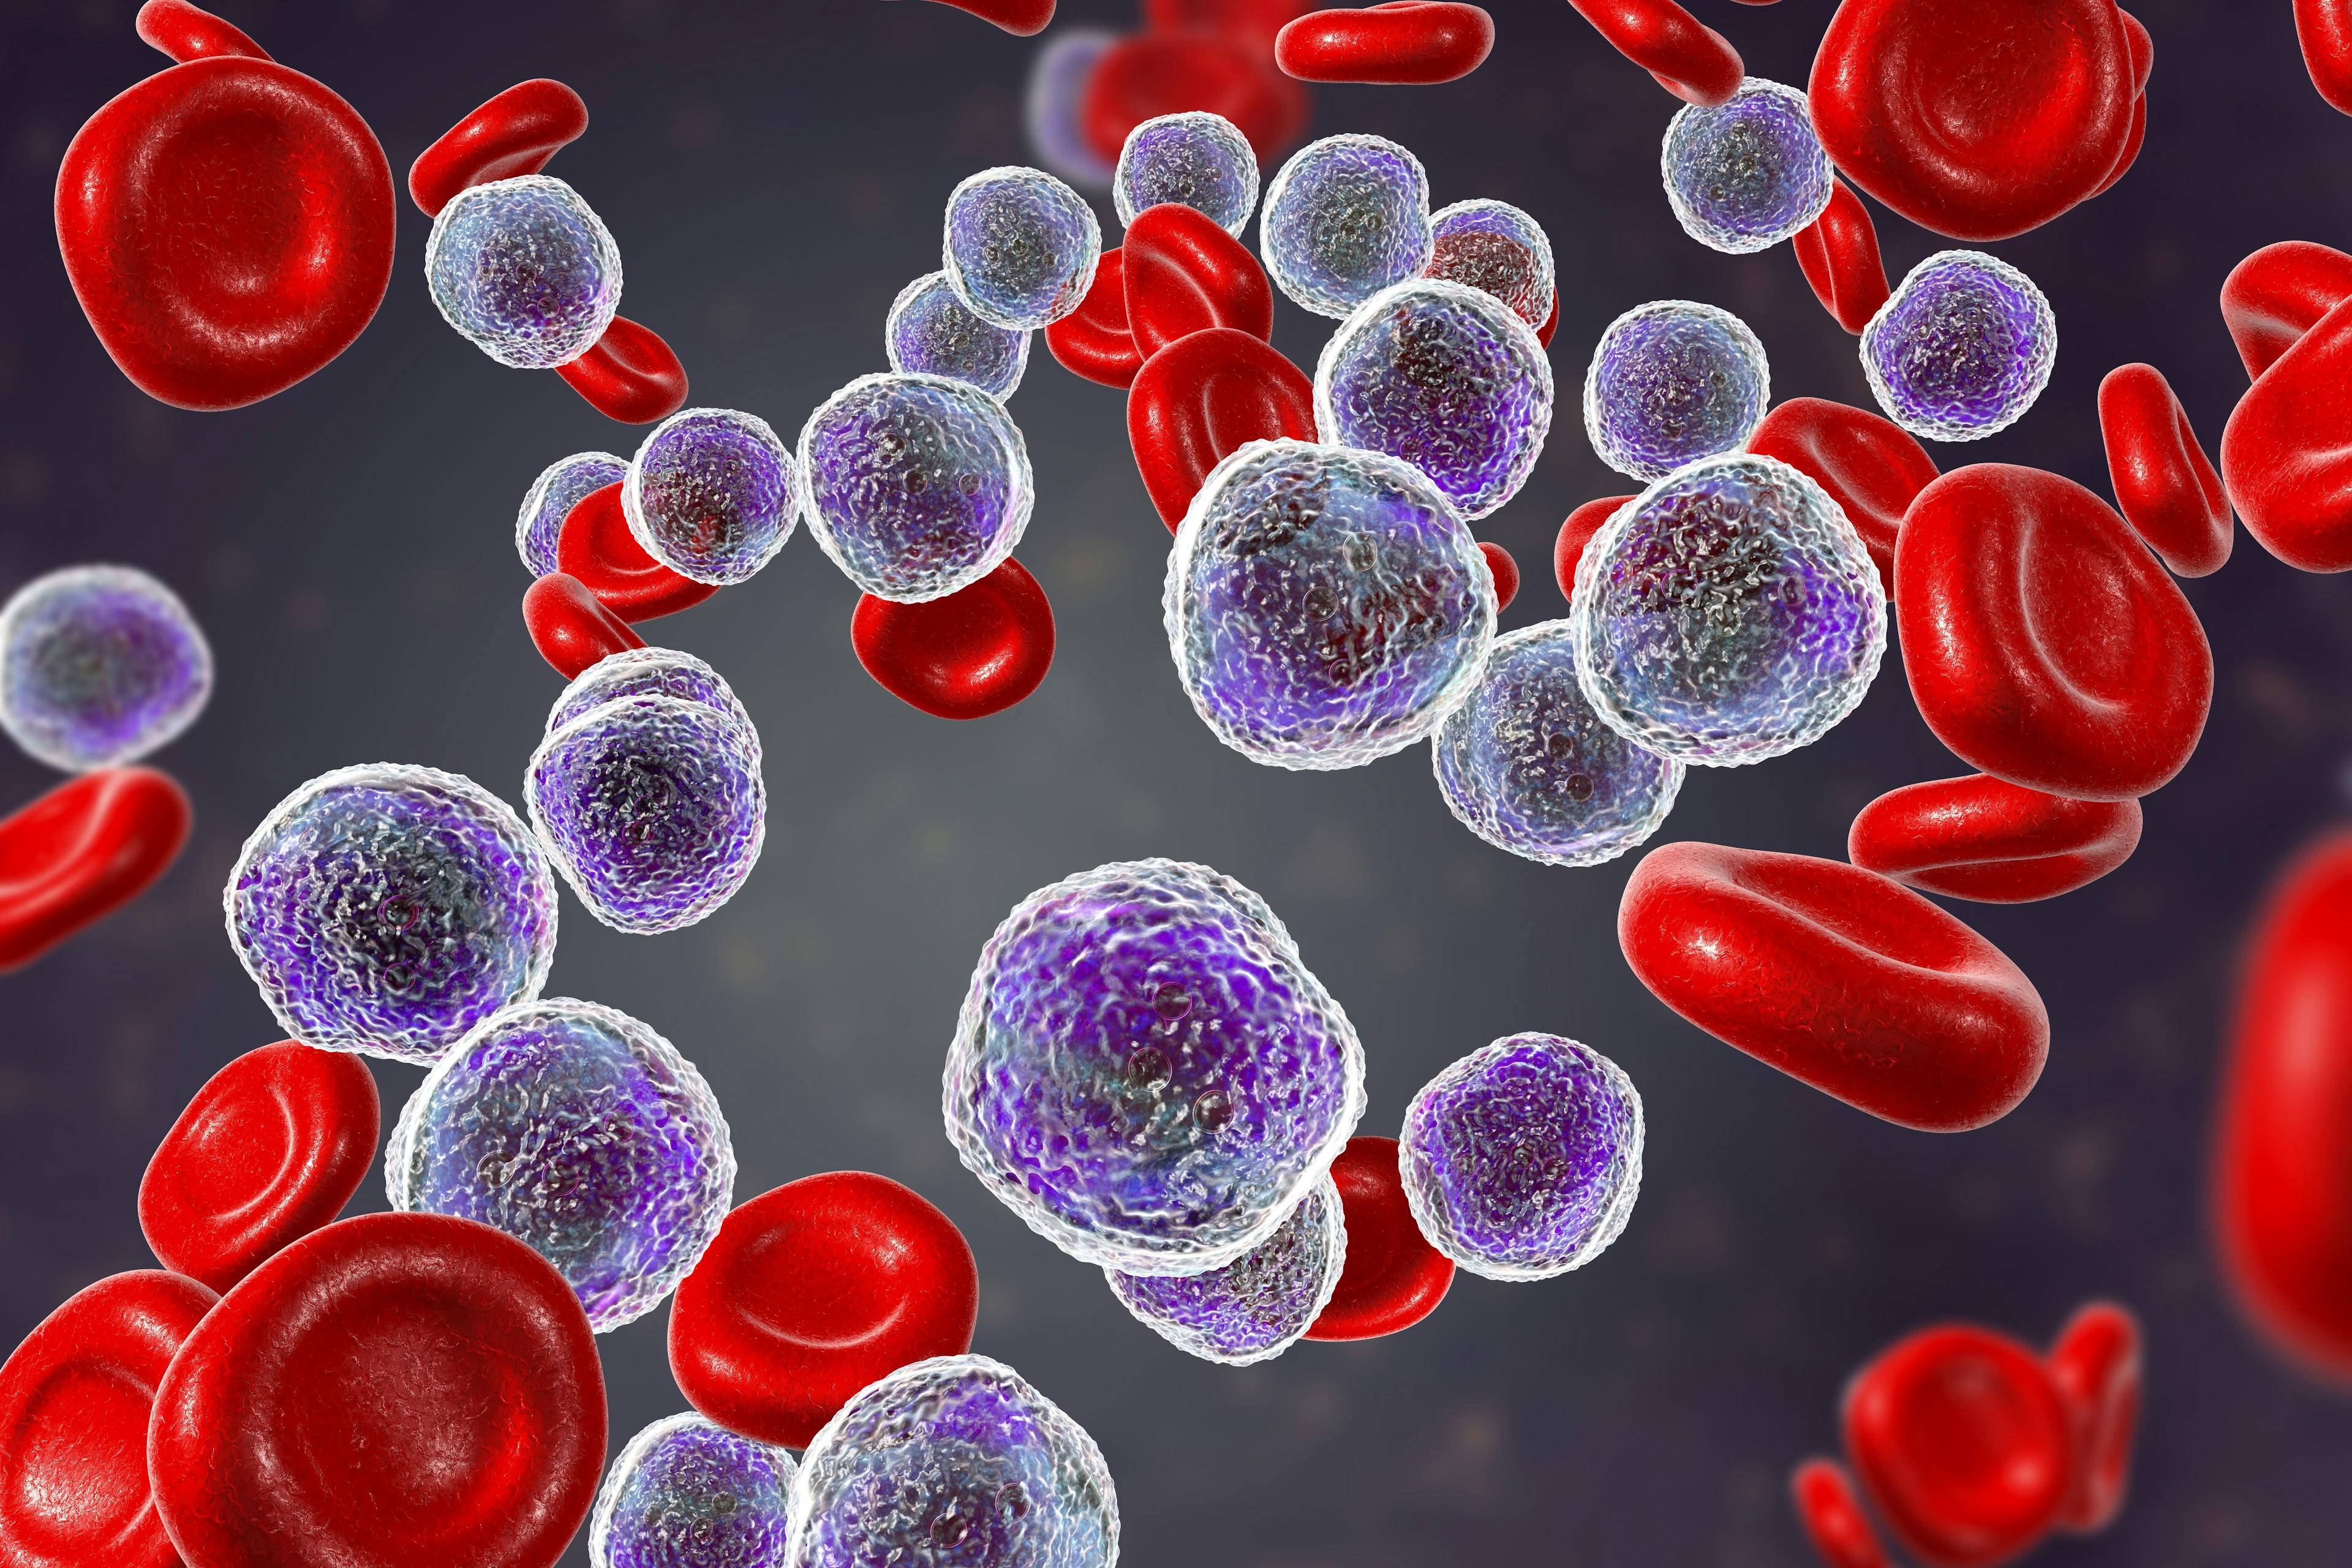 CAR T-Cell Therapy Ushers in New Era for Myeloma Treatment